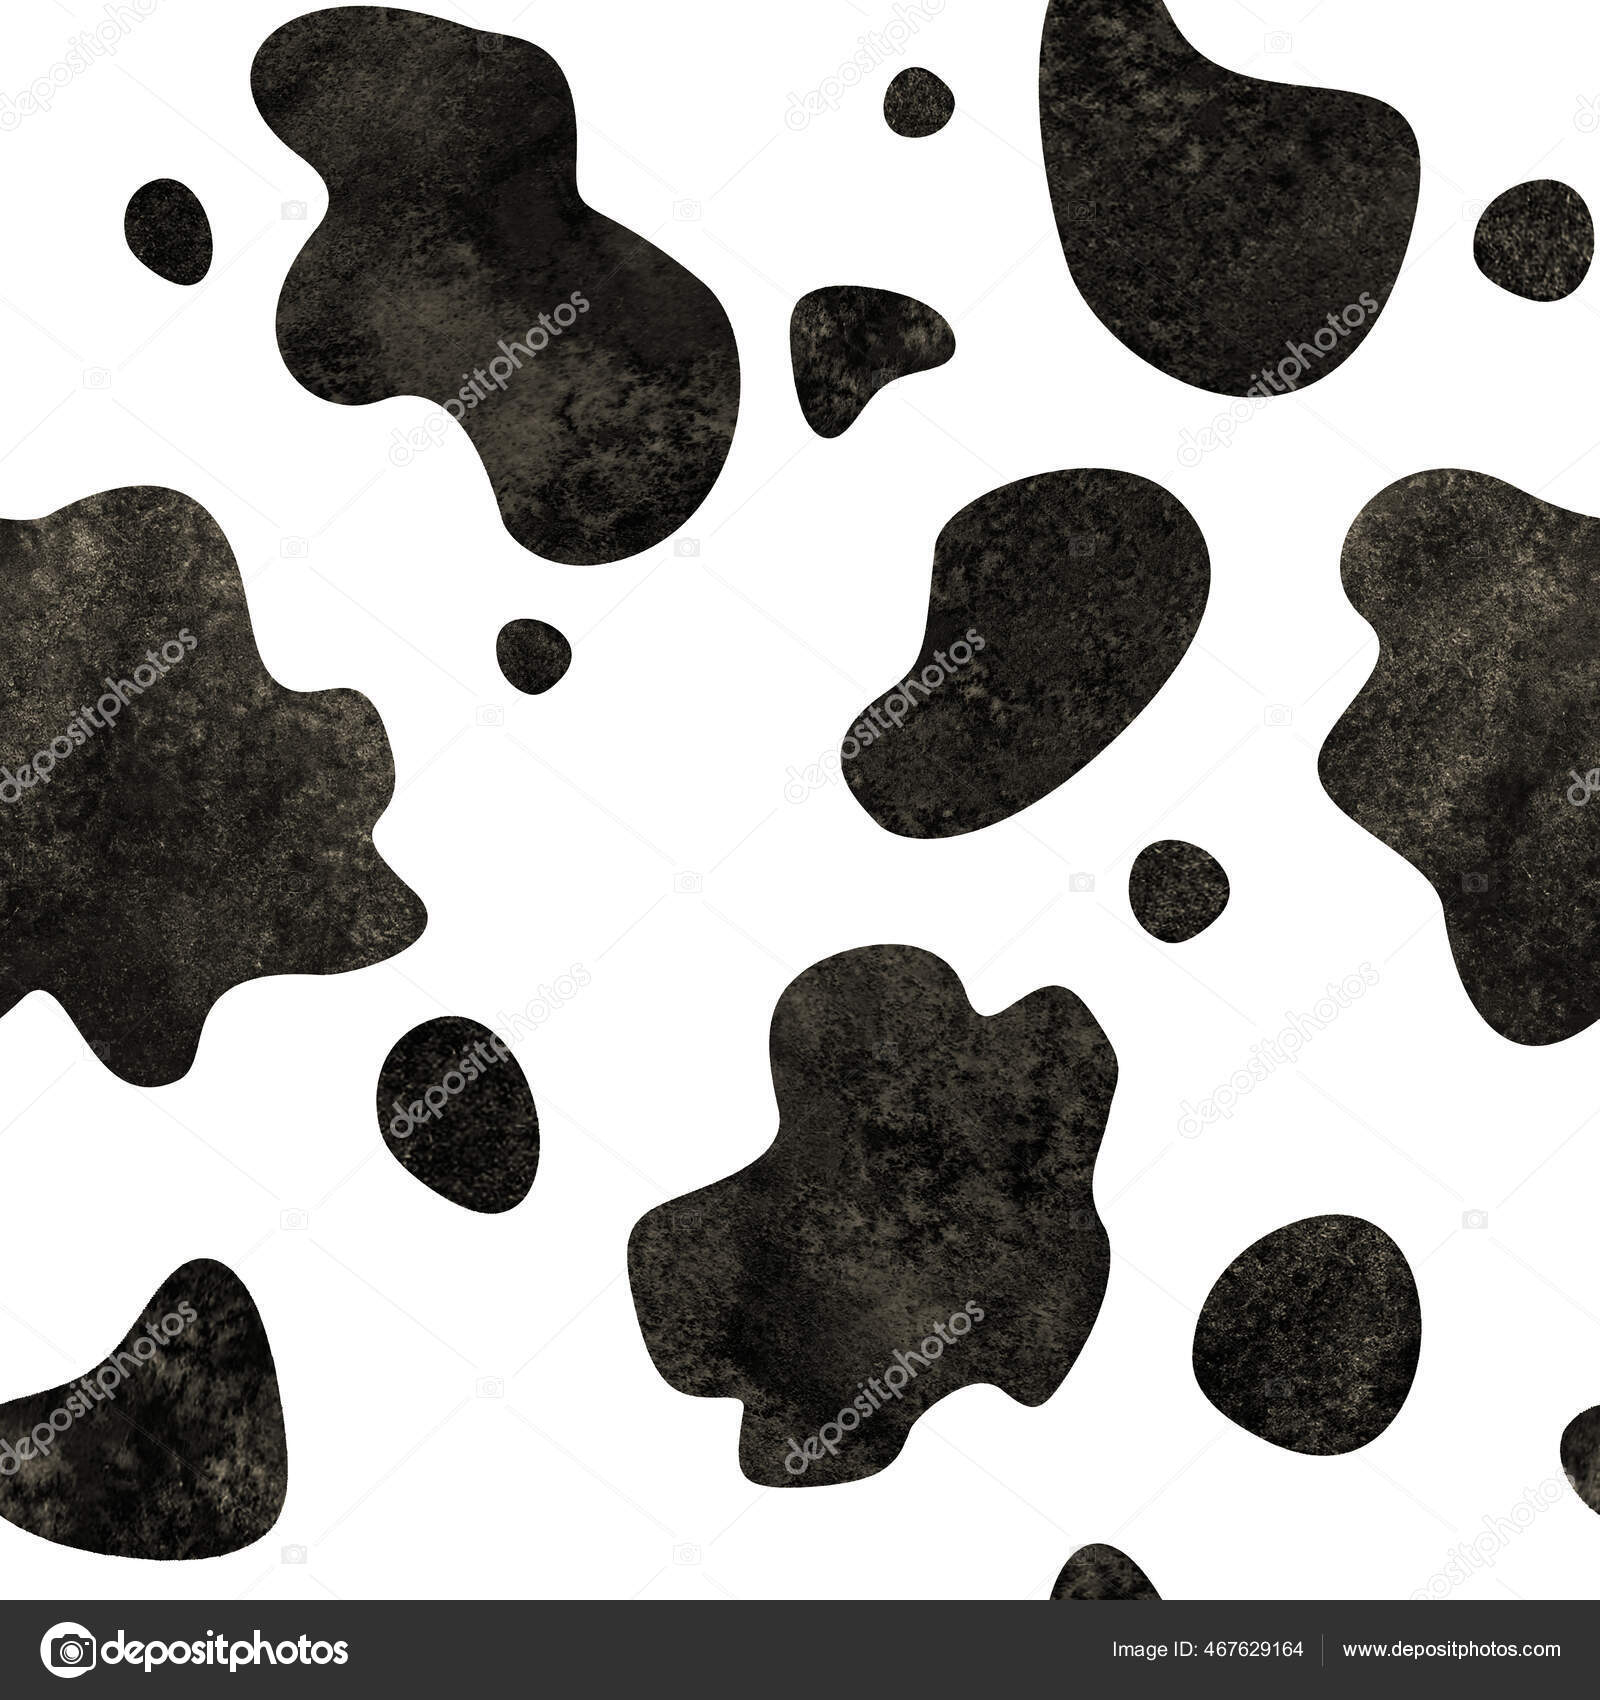 Cow spots pattern wrapping paper, animal print